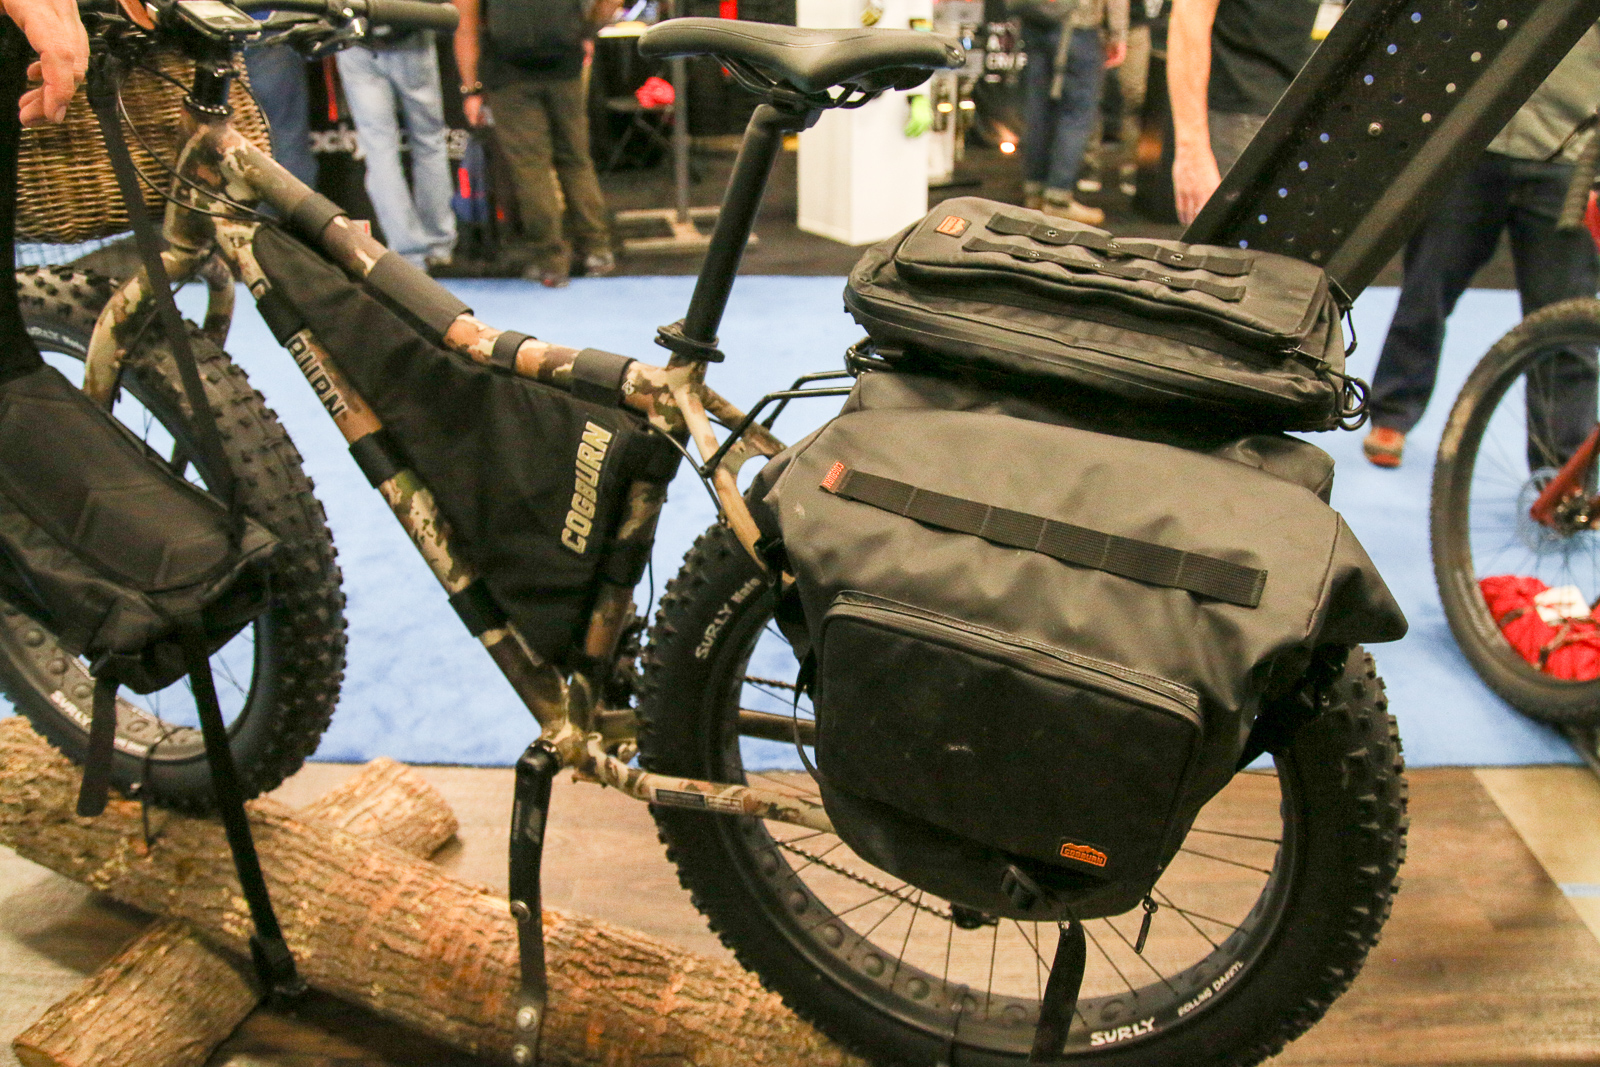 Cogburn casts their vote for going by bike with prototype fishing